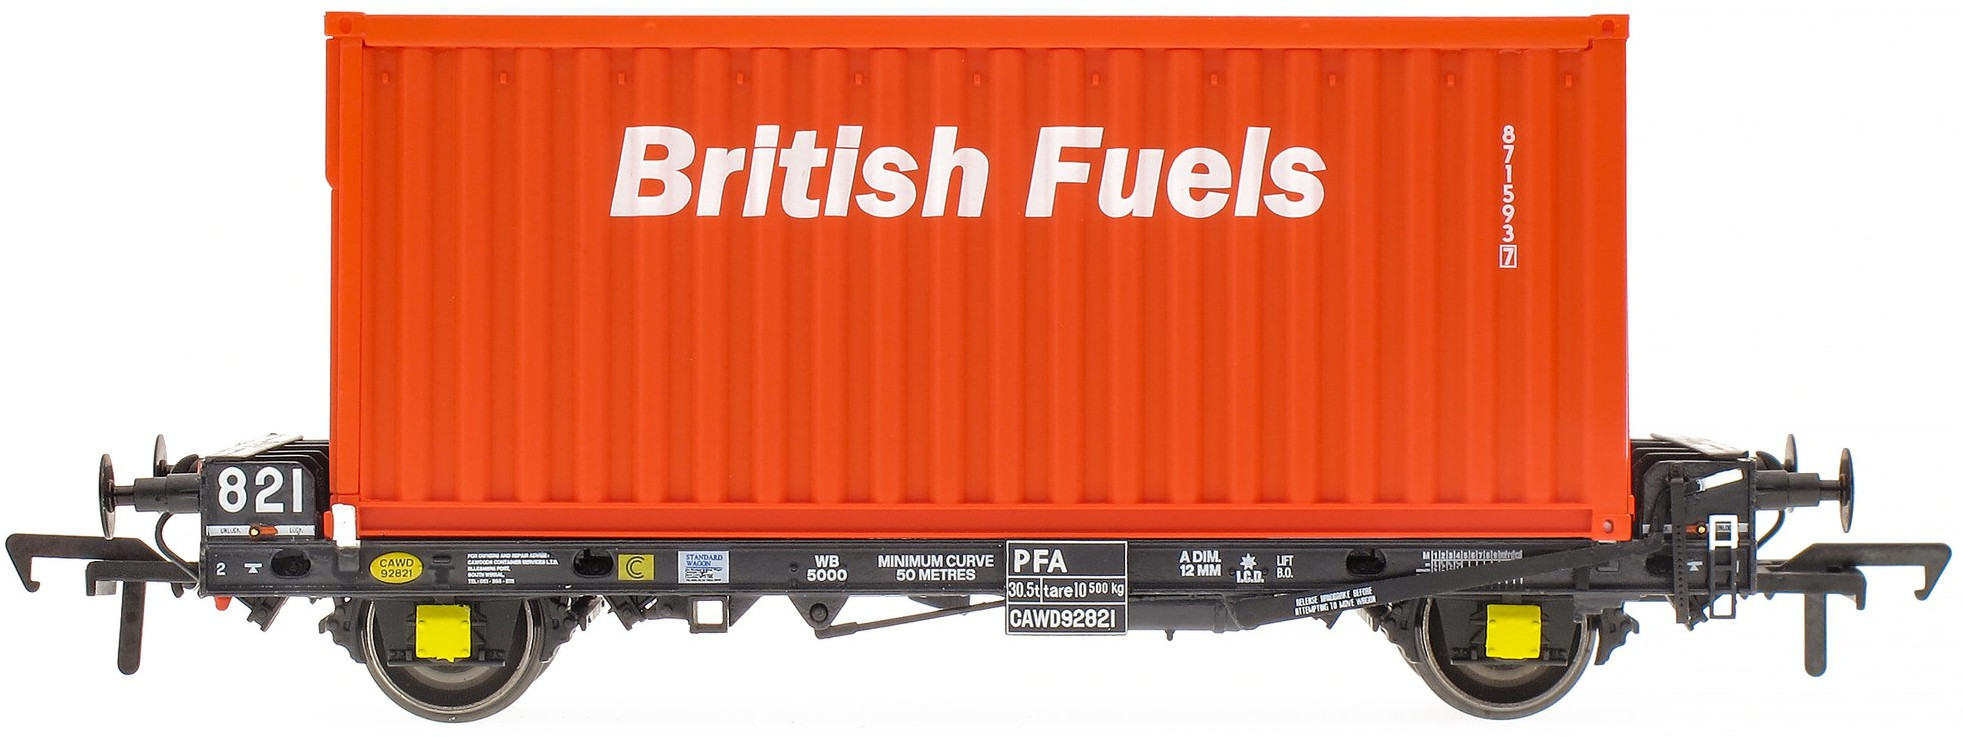 Accurascale ACC2068BFLH Flat British Fuels BFL92821 Image